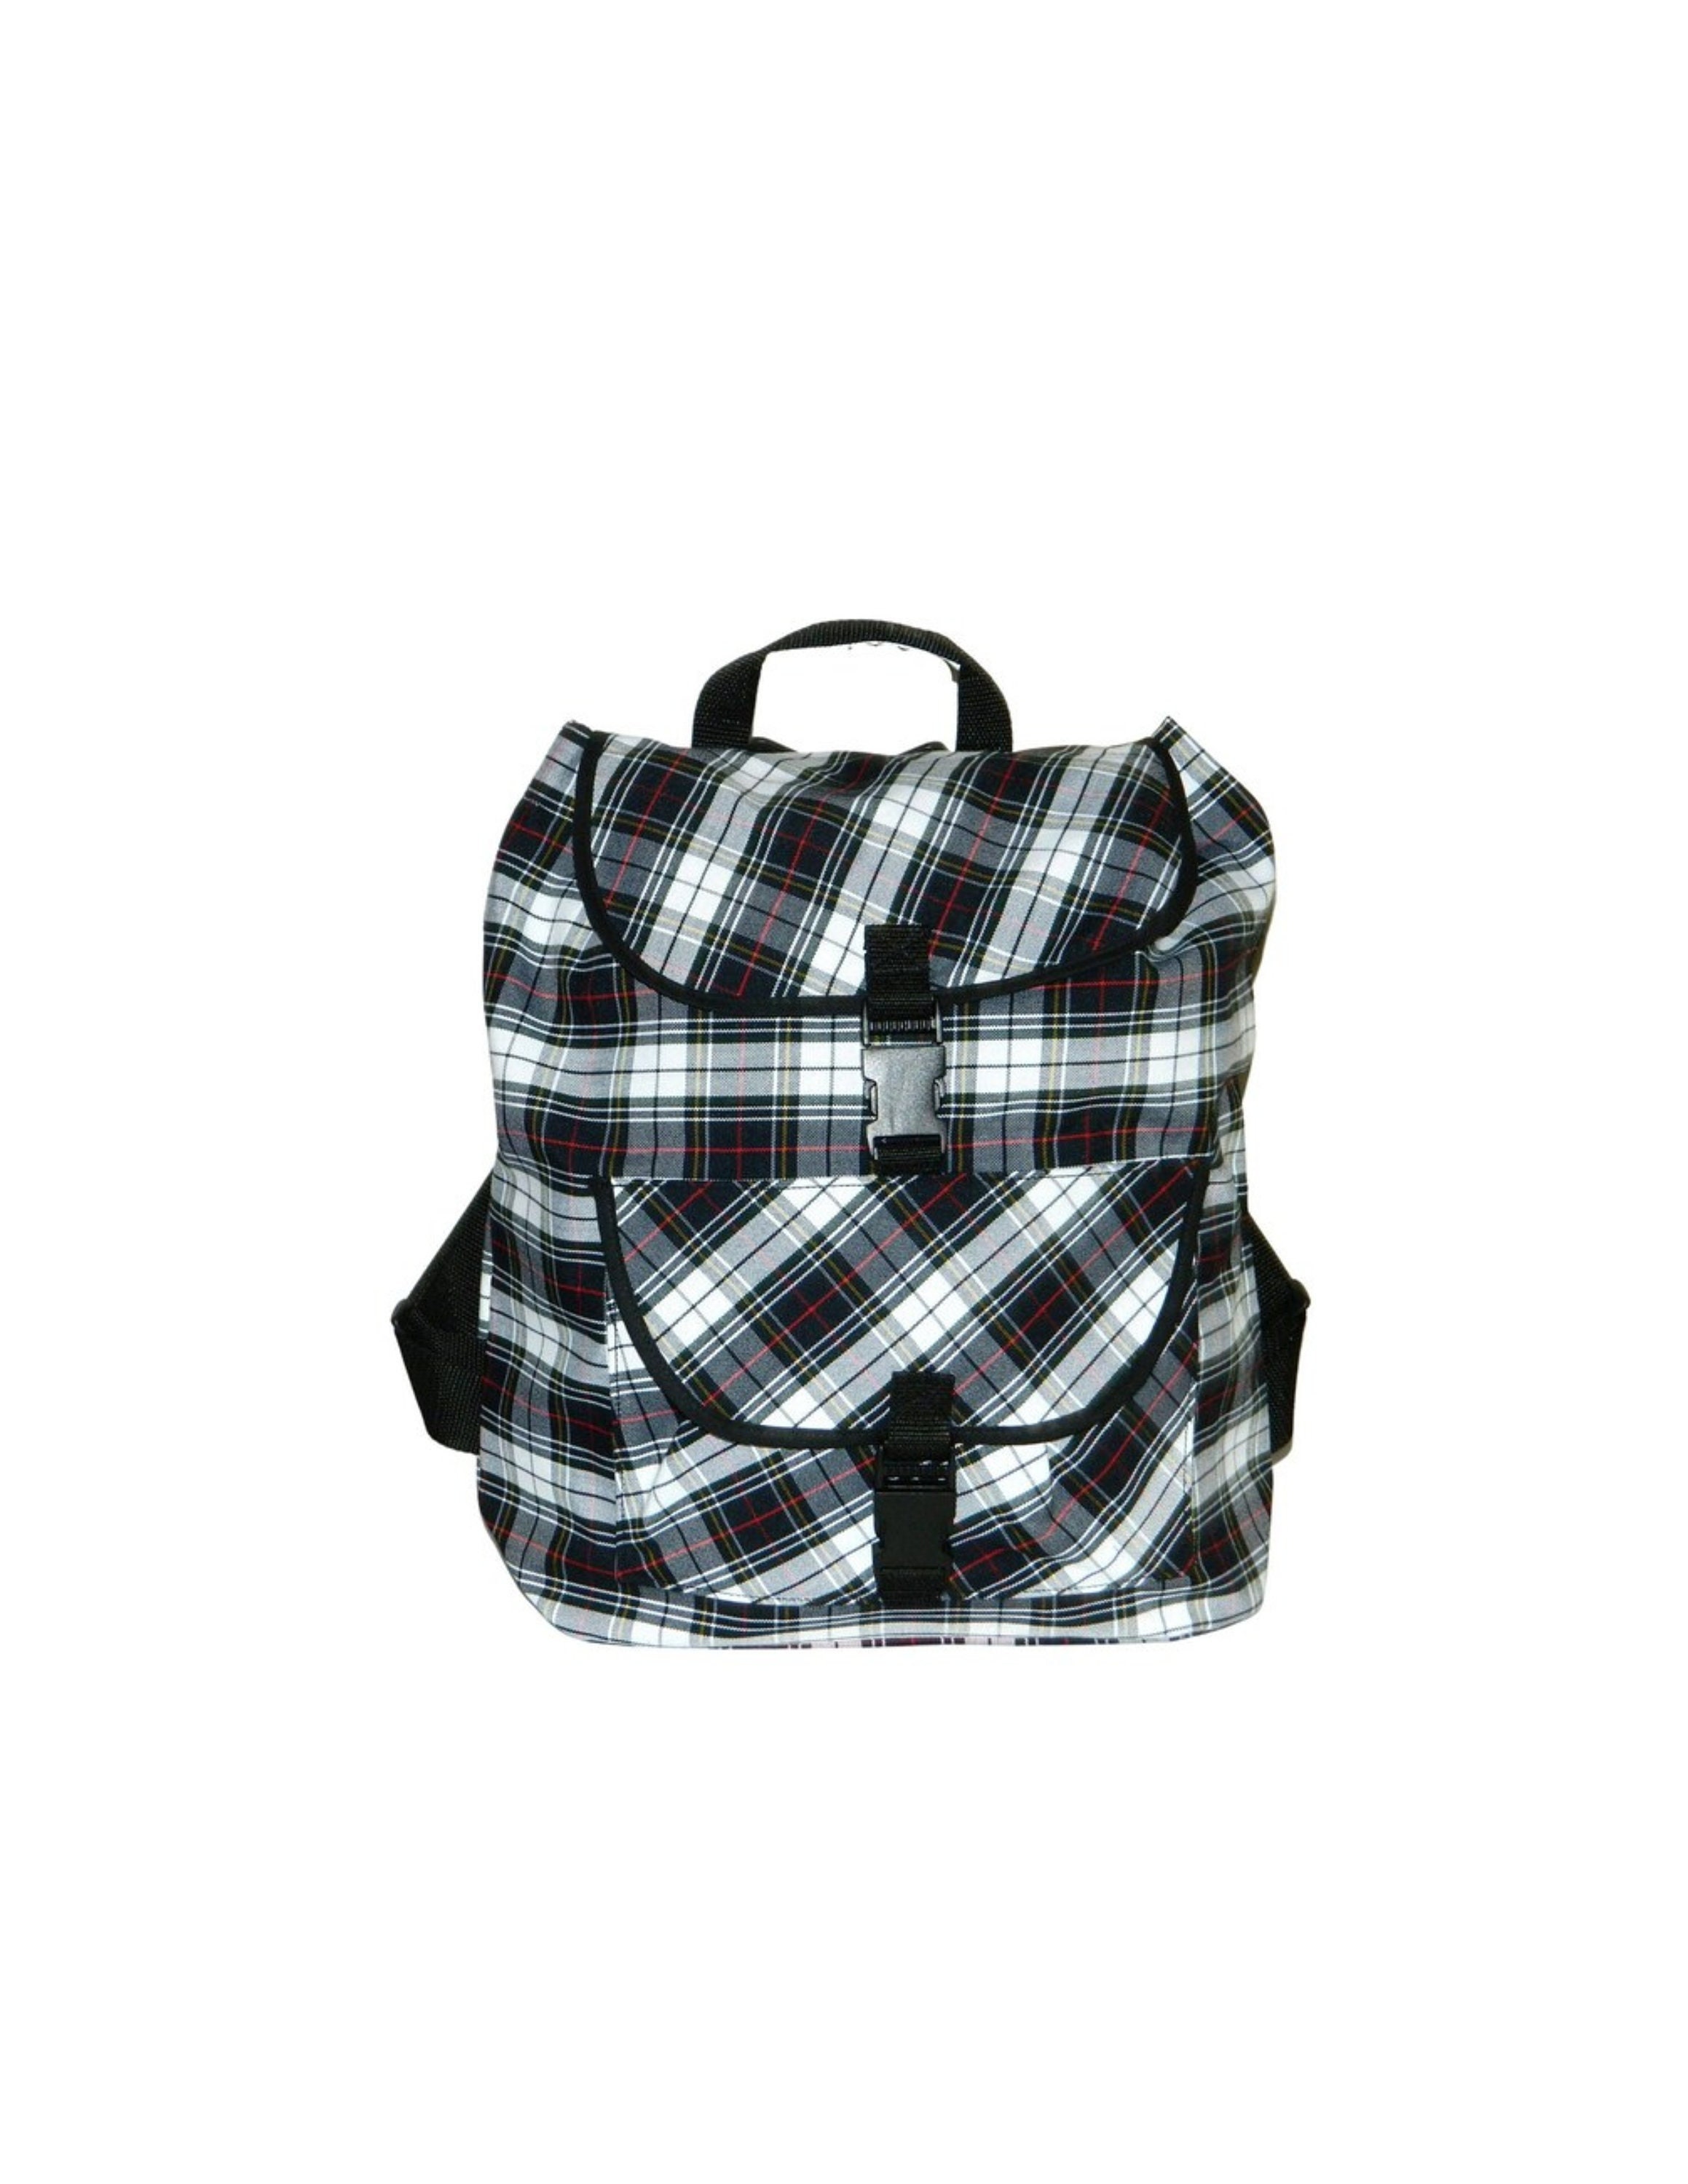 Checkered Backpack Fashion Classic Large Backpack for College Students  Travel bag Brown Checkered for Christmas Birthday Gifts